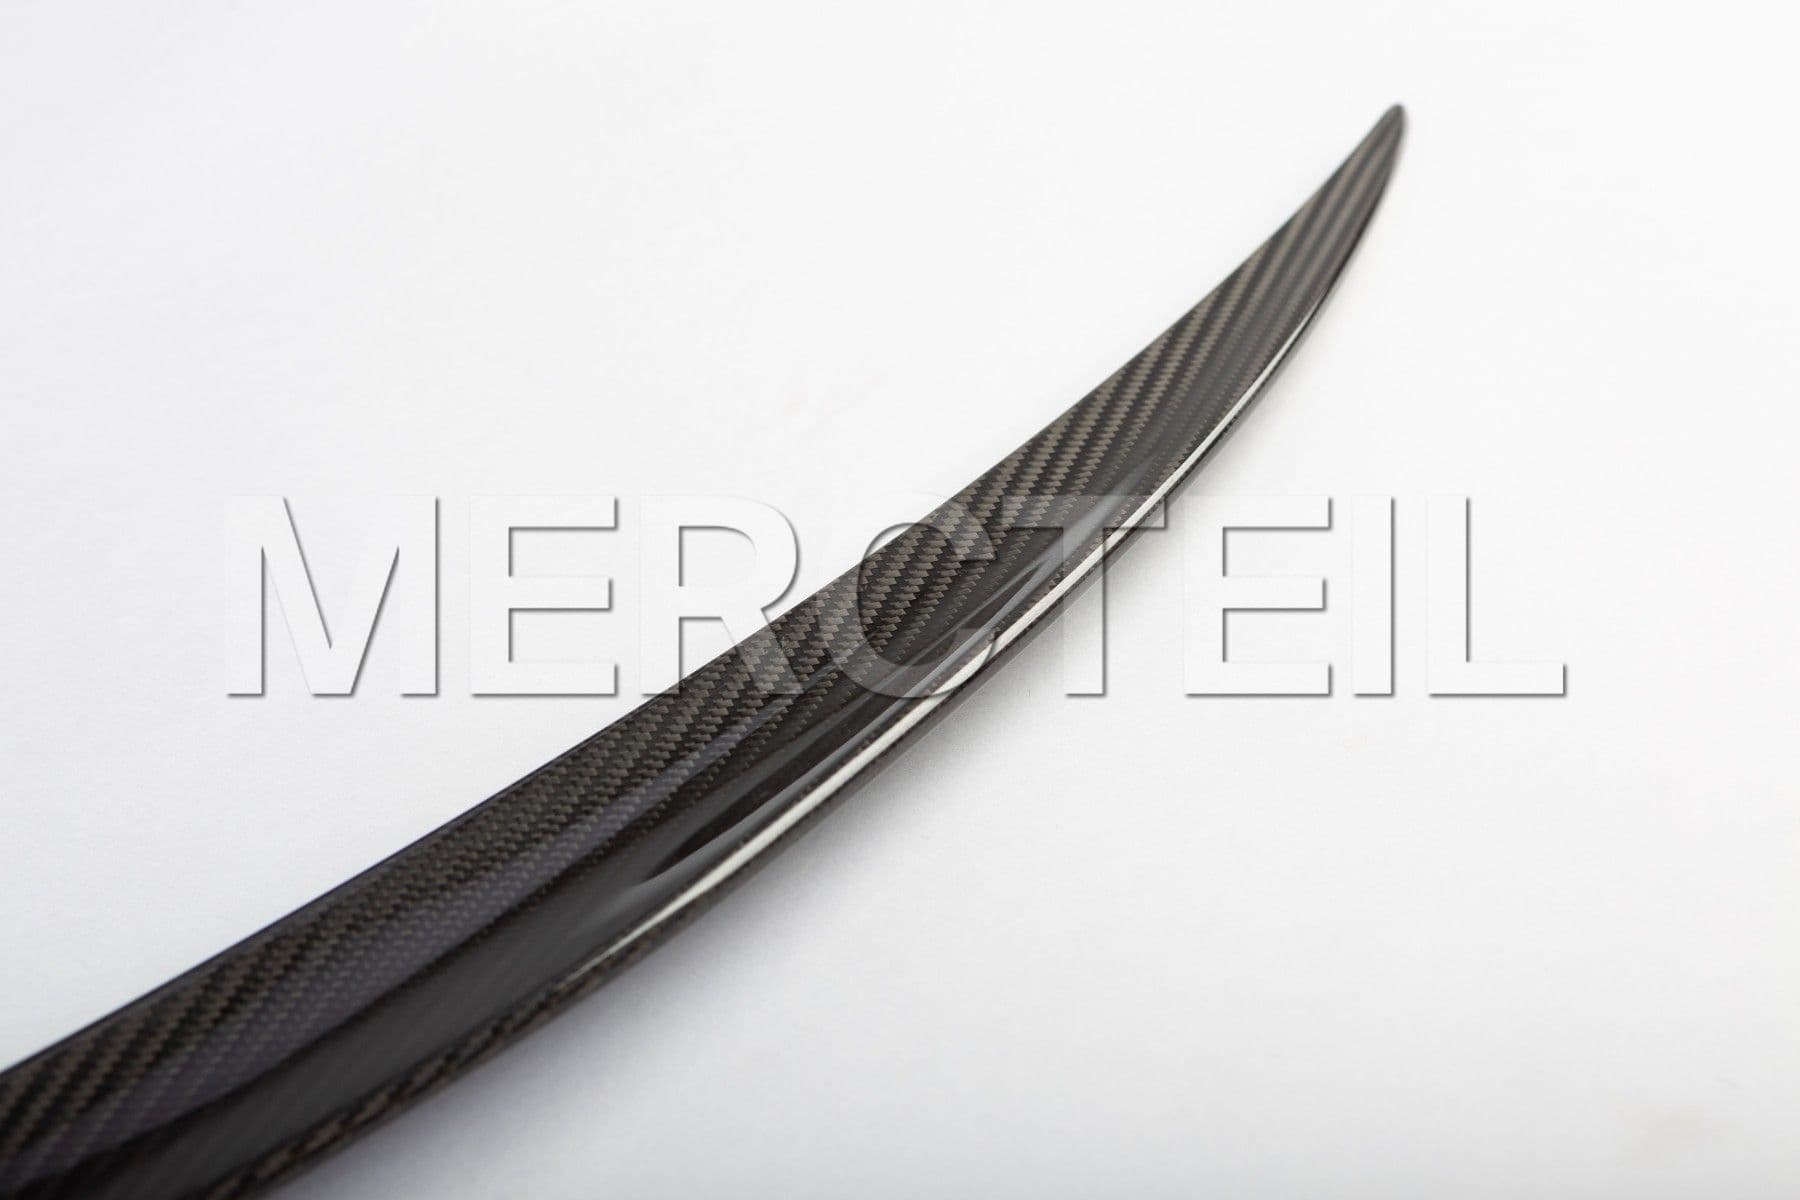 AMG C Class Coupe Carbon Lid Spoiler Genuine Mercedes AMG (part number: A2057901700)